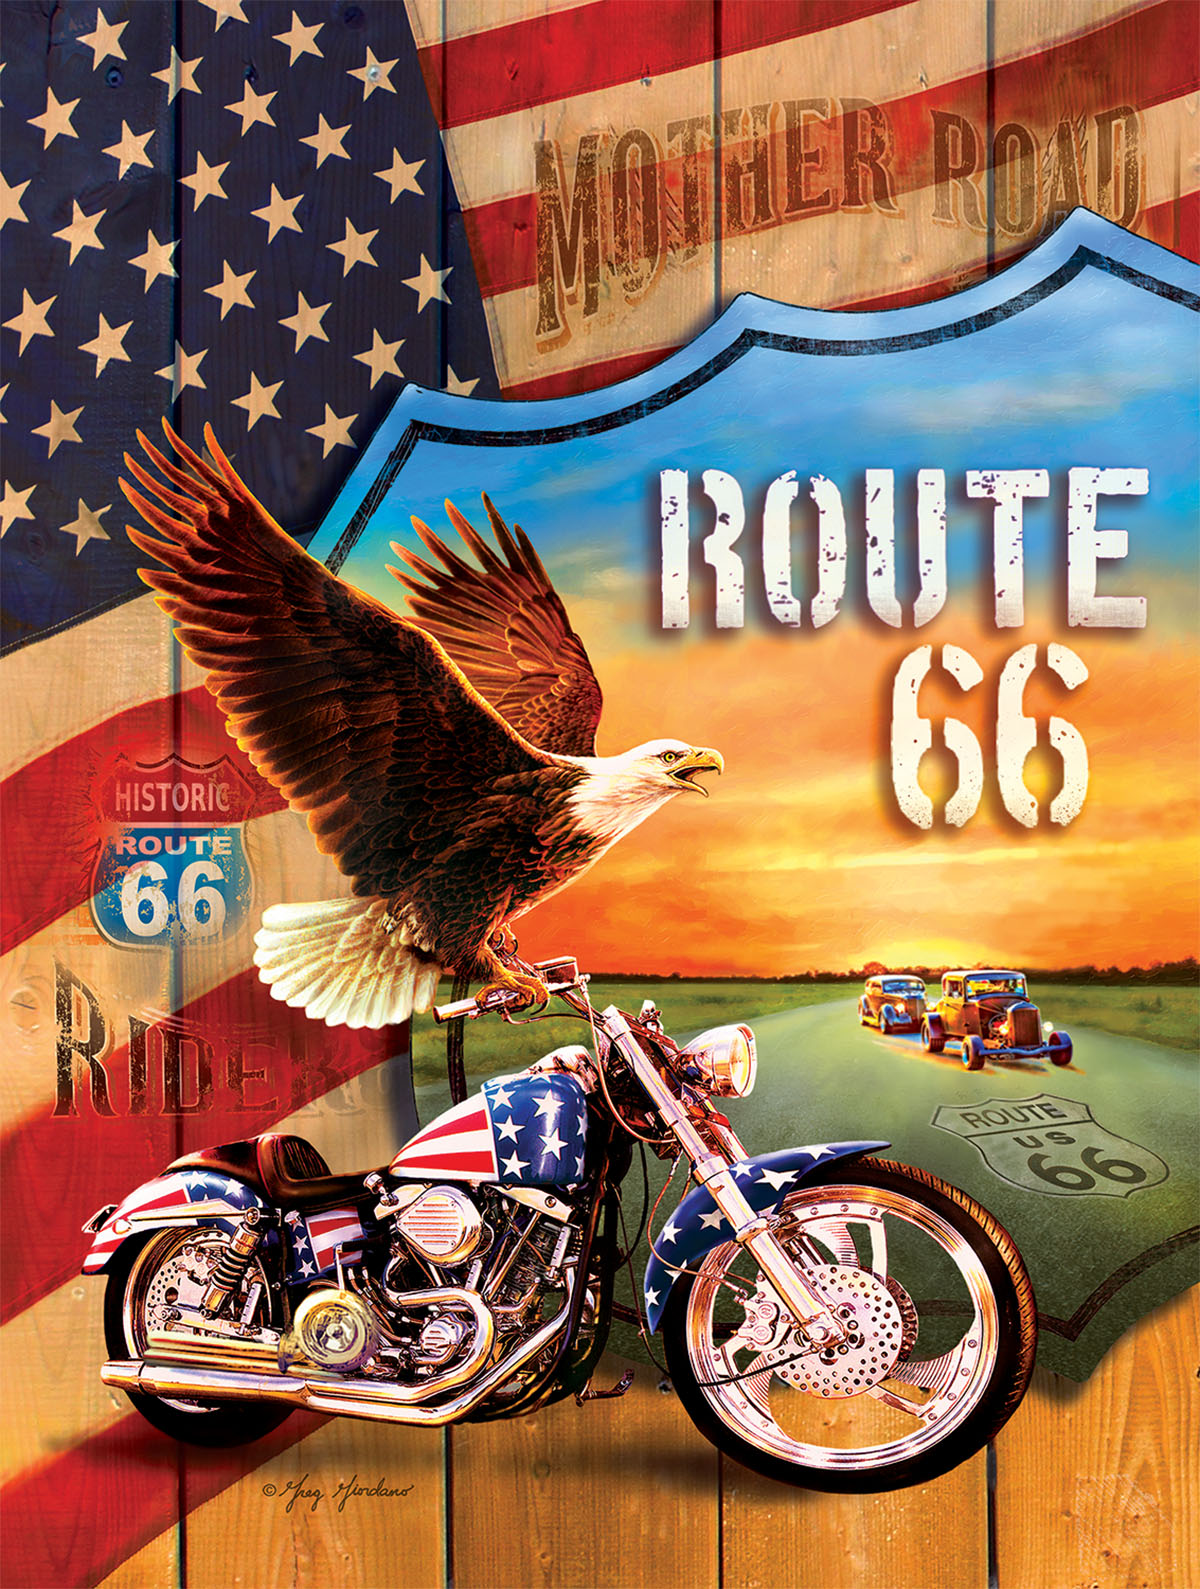 Mother Road Travel Jigsaw Puzzle